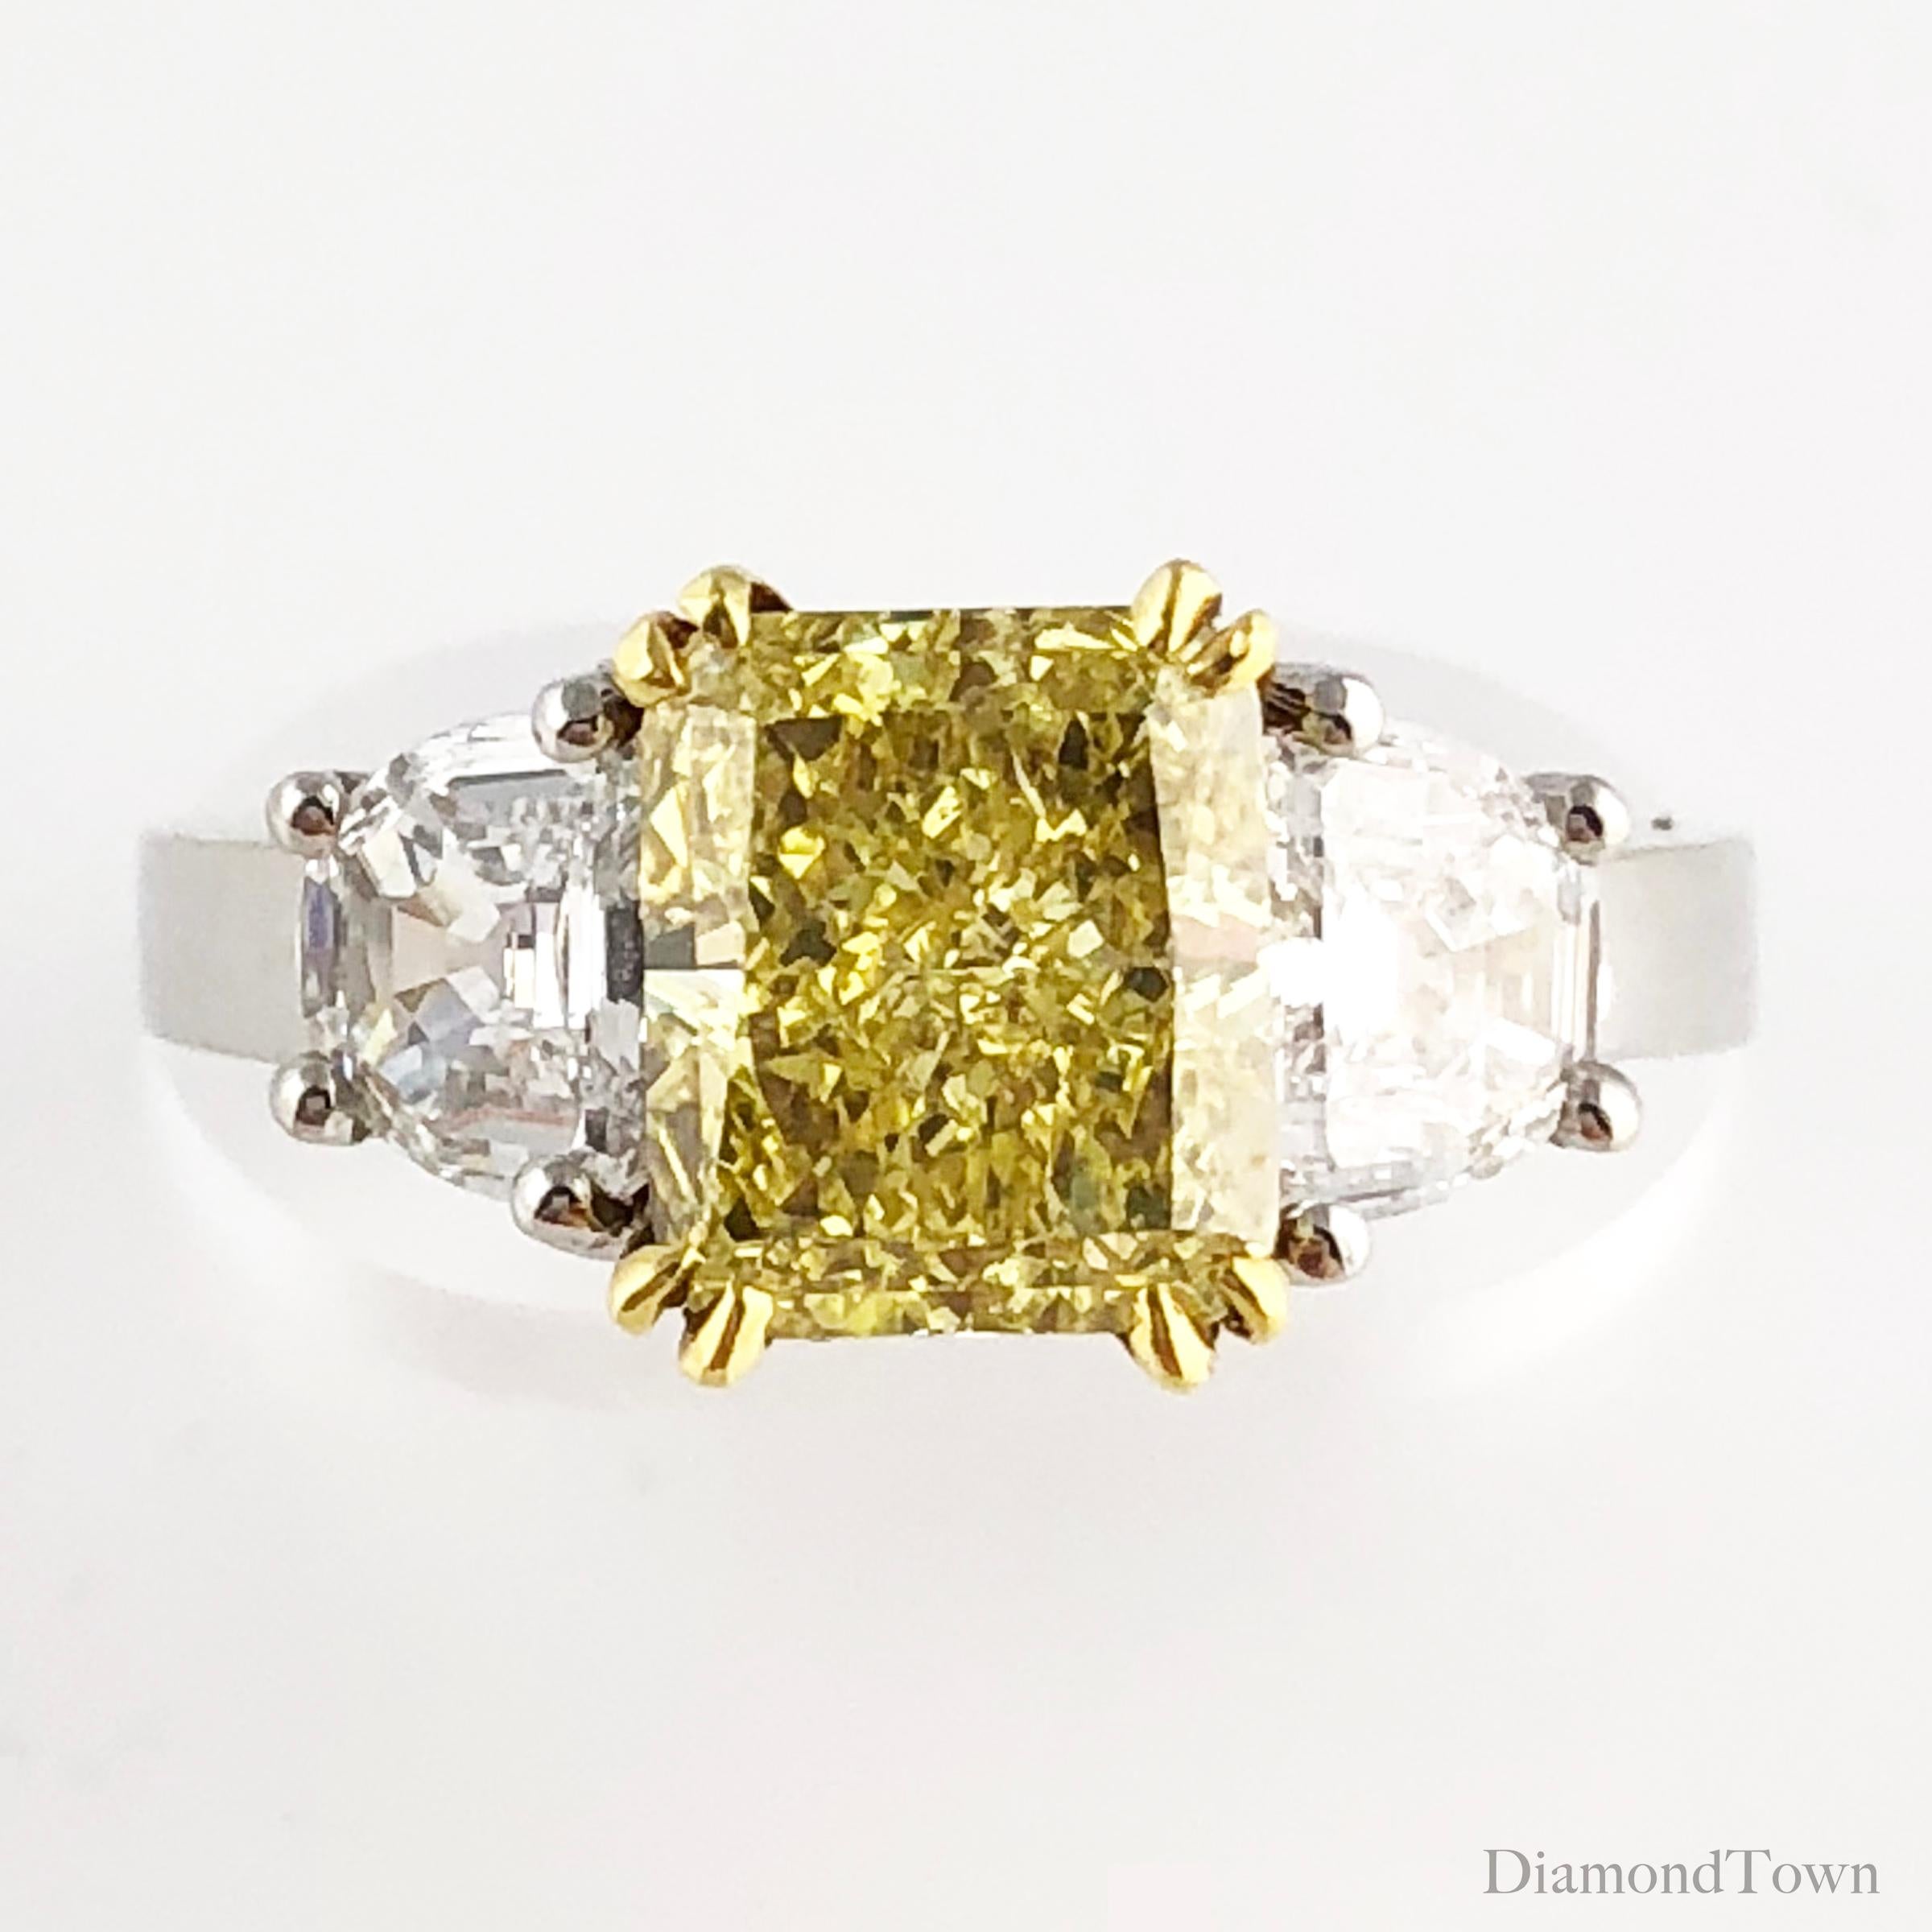 (DiamondTown) This gorgeous handcrafted ring features a 2.25 carat GIA certified radiant cut Natural Fancy Intense Yellow diamond center, flanked by two half-moon diamonds, bringing the total diamond weight to 3.10 carats. The ring is set in